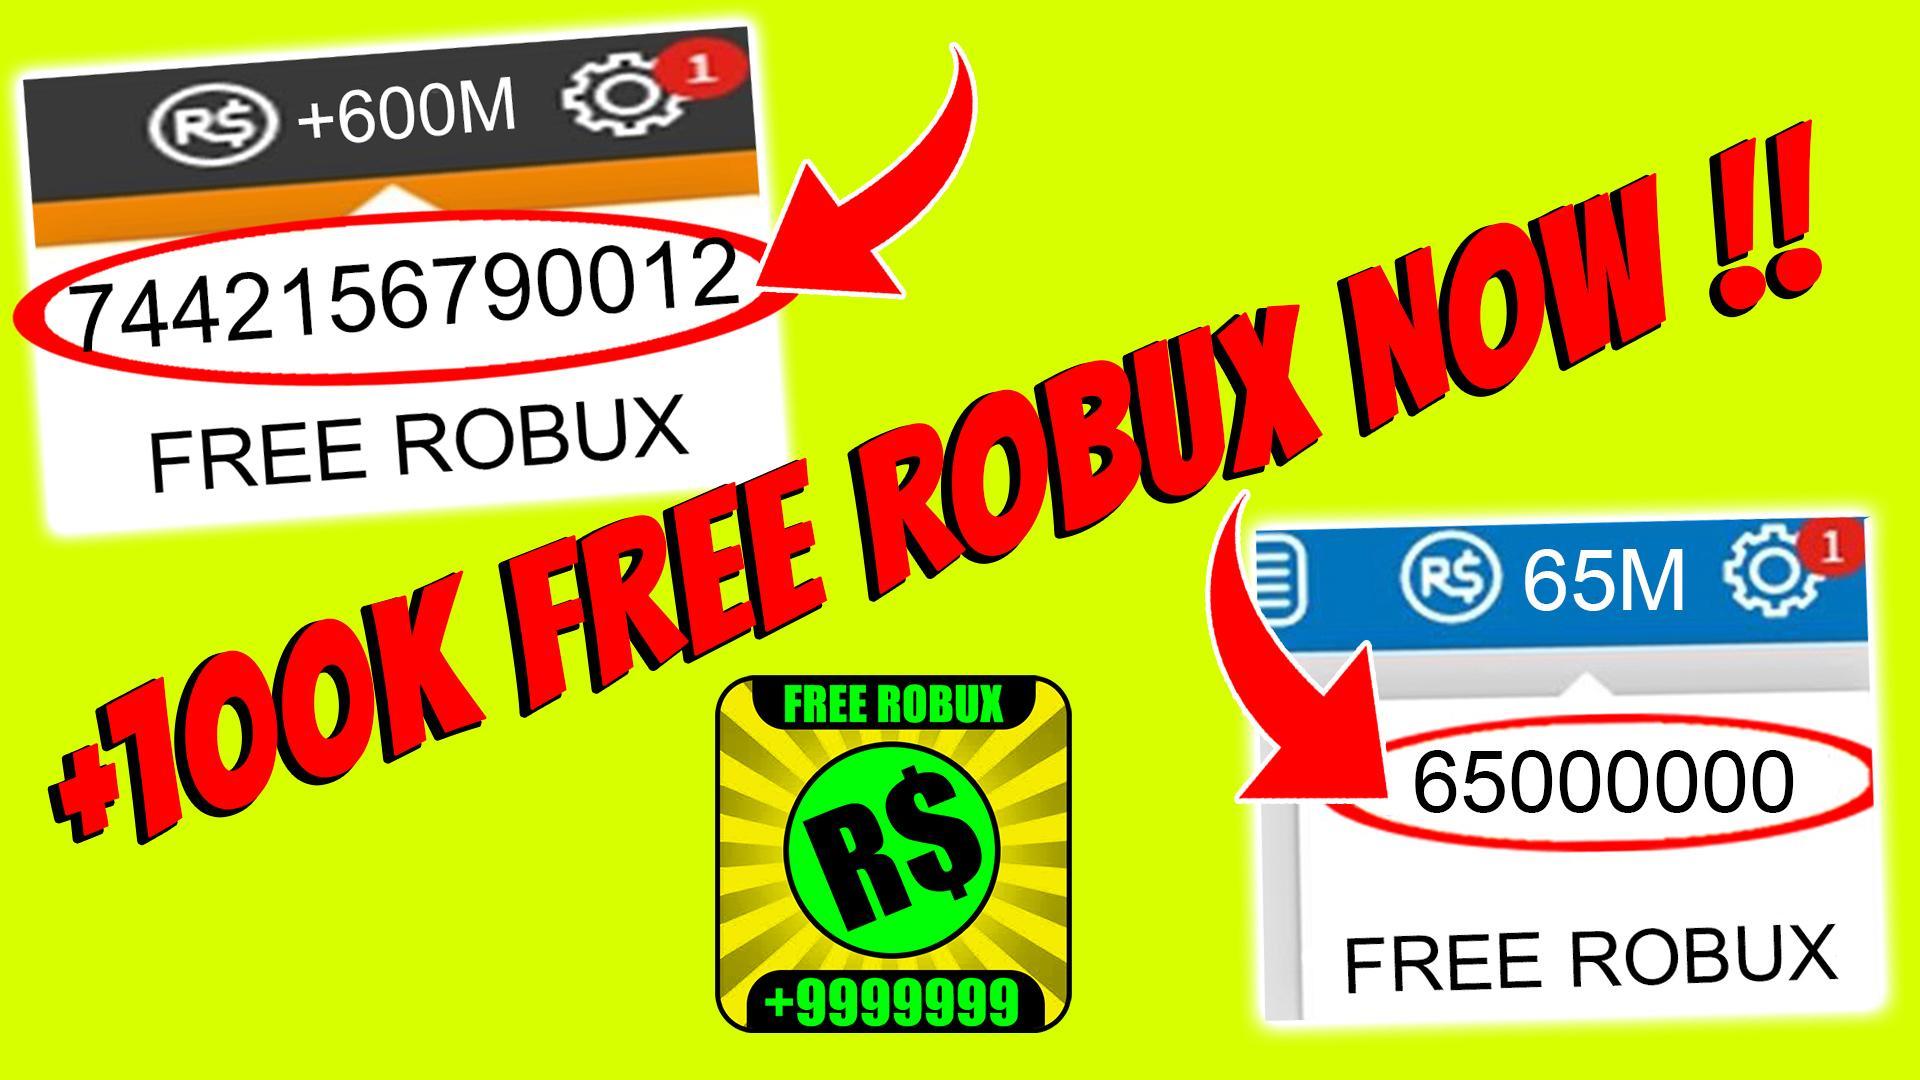 Unlimited Robux Tips For Android Apk Download - roblox hack robux adder unlimited robux